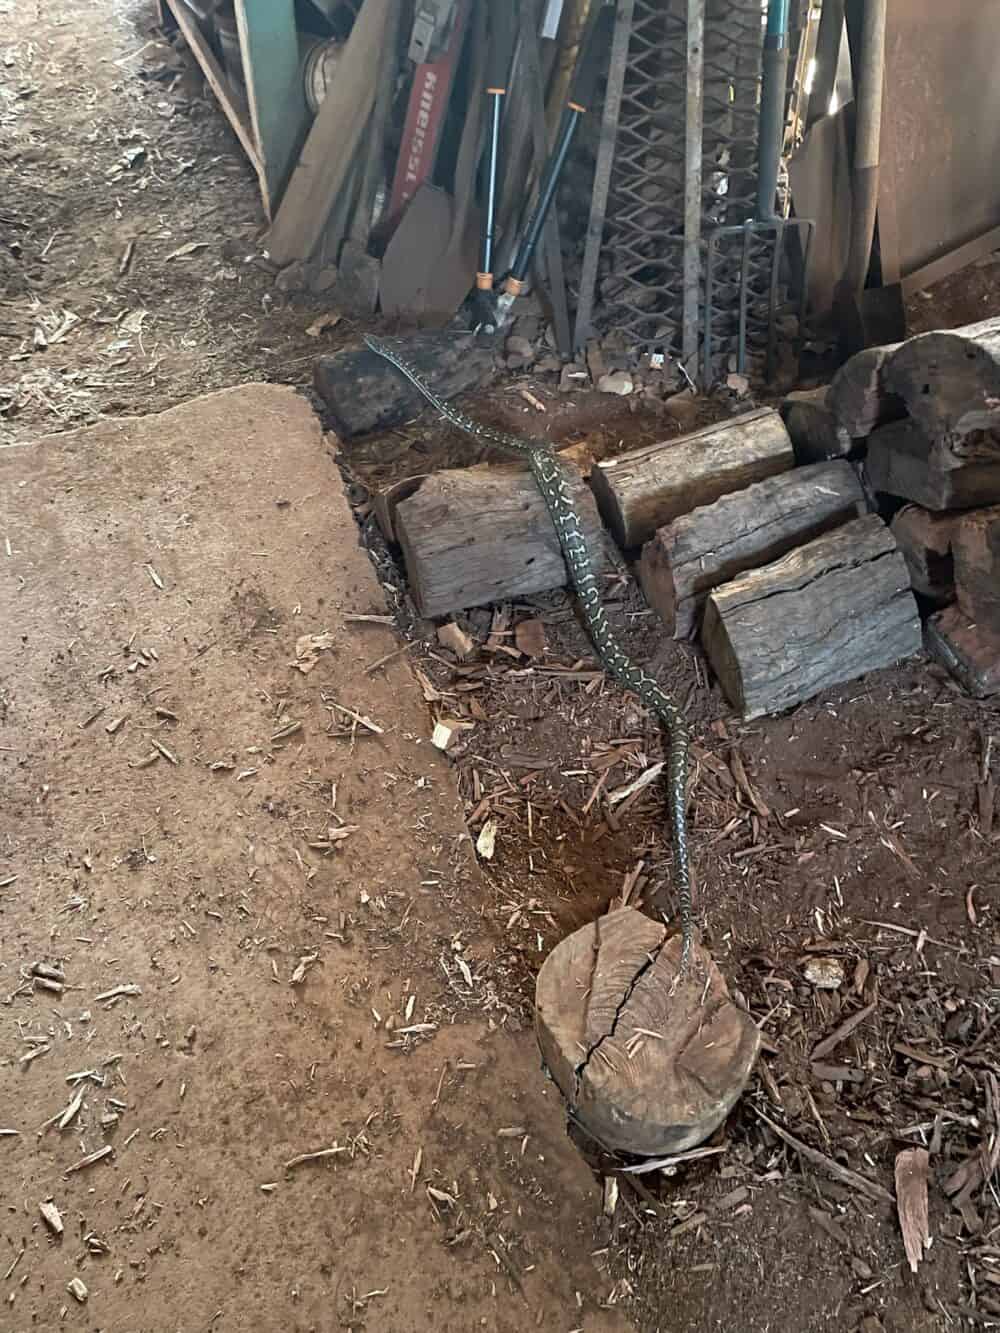 Snake found in shed